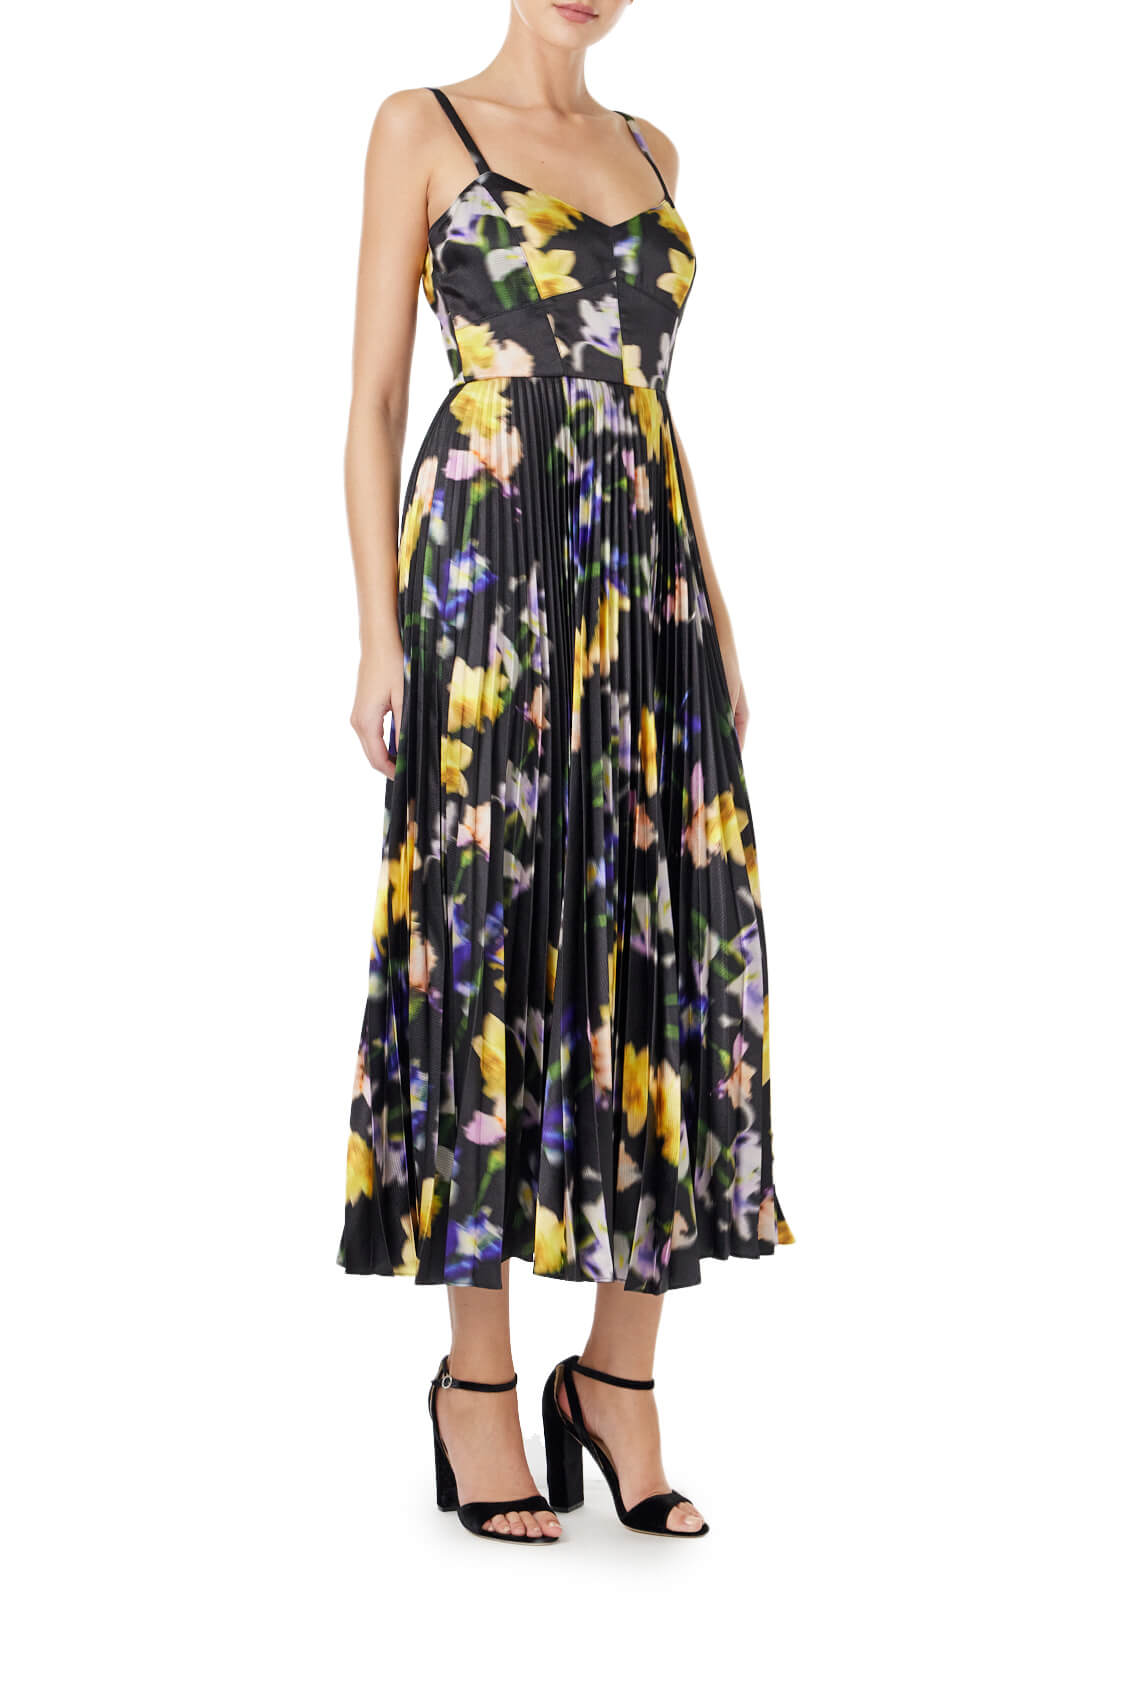 ML Monique Lhuillier  dark floral printed satin midi dress with thin straps and a pleated skirt.